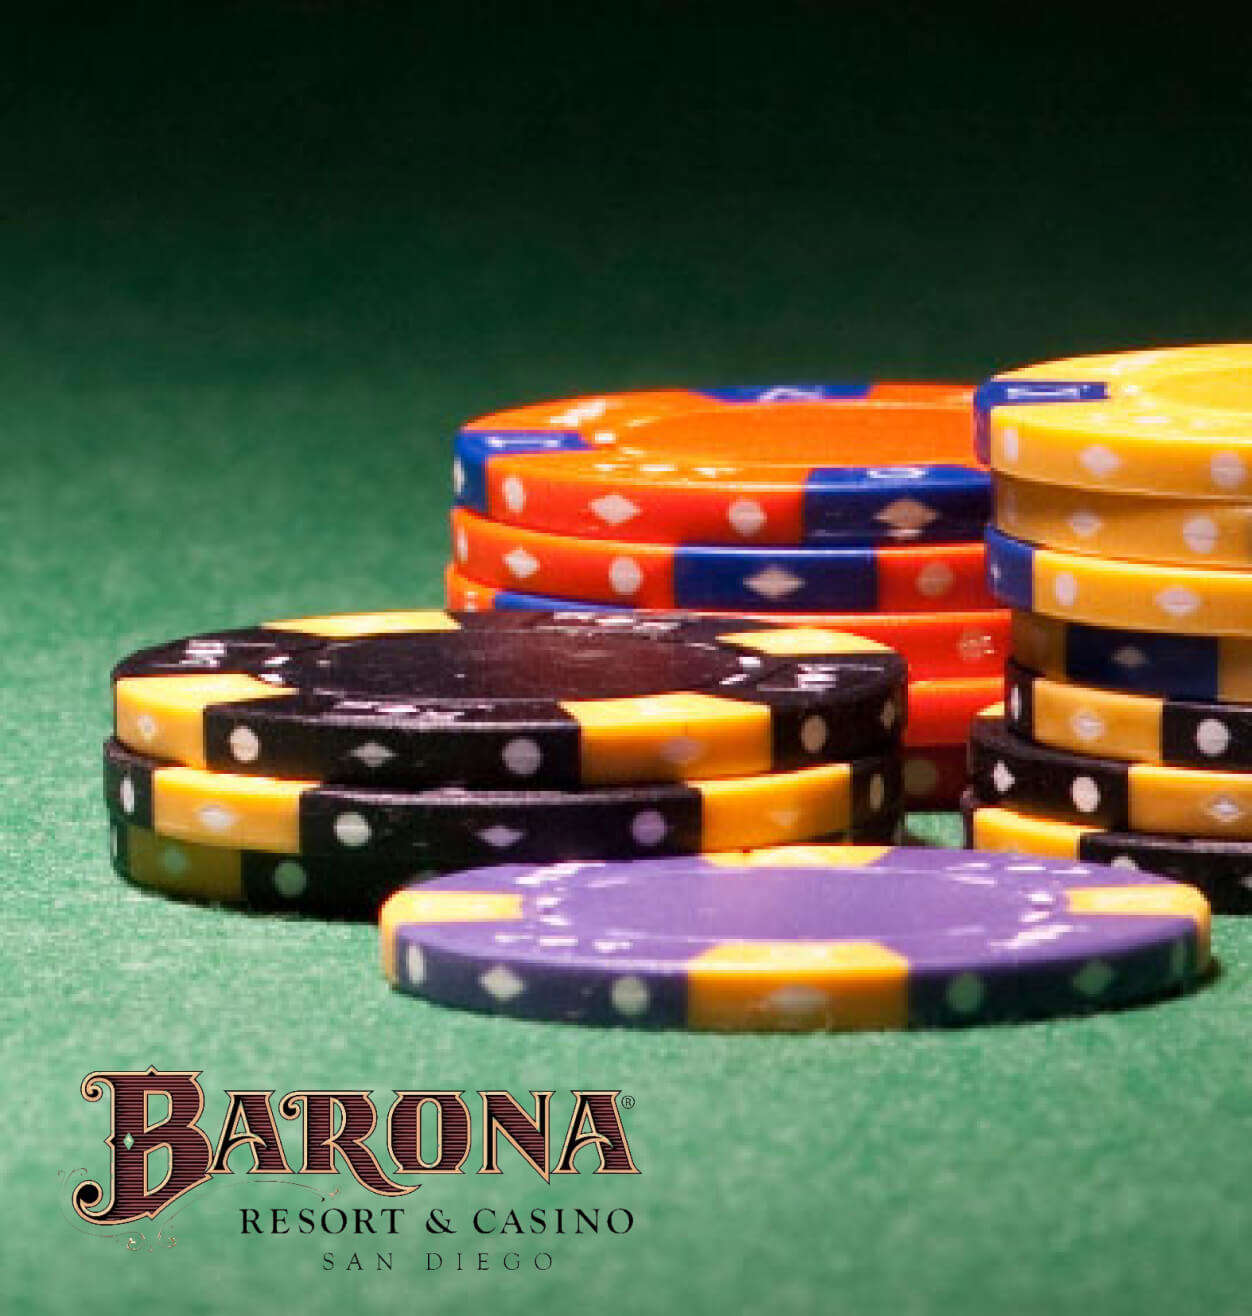 View our case study for Barona